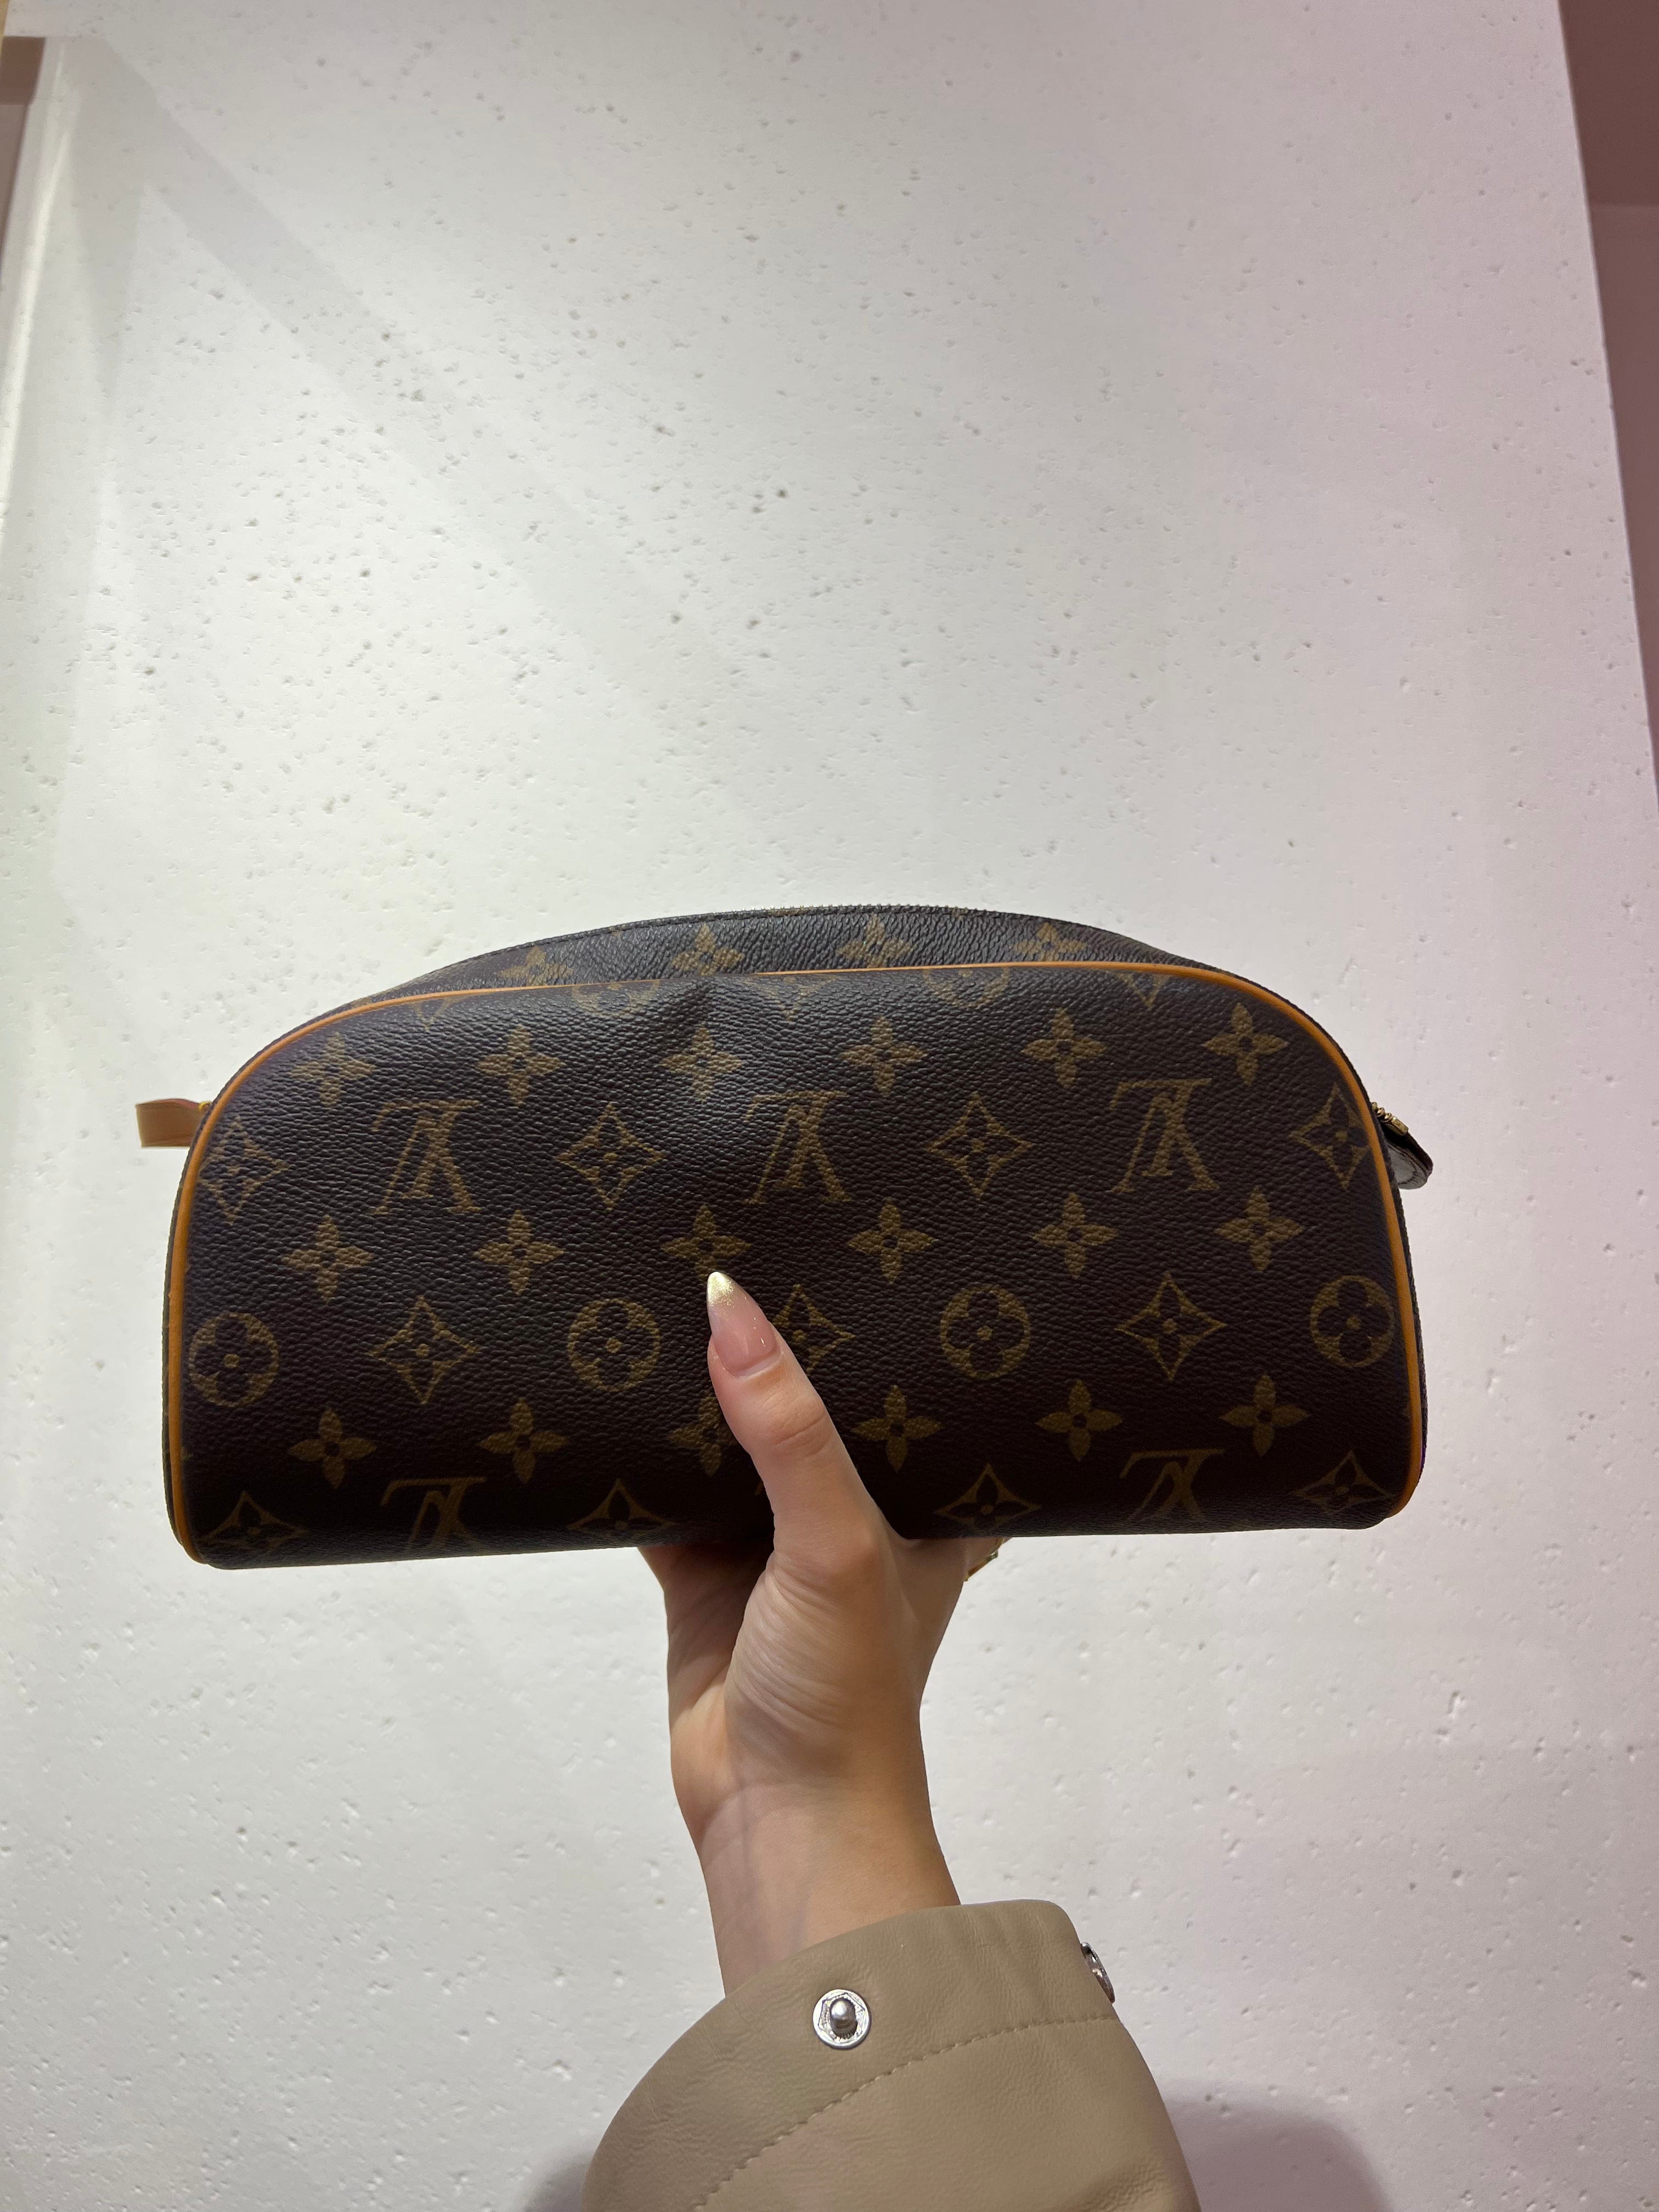 The modern LV vanity bags – Deluxe Life Collection